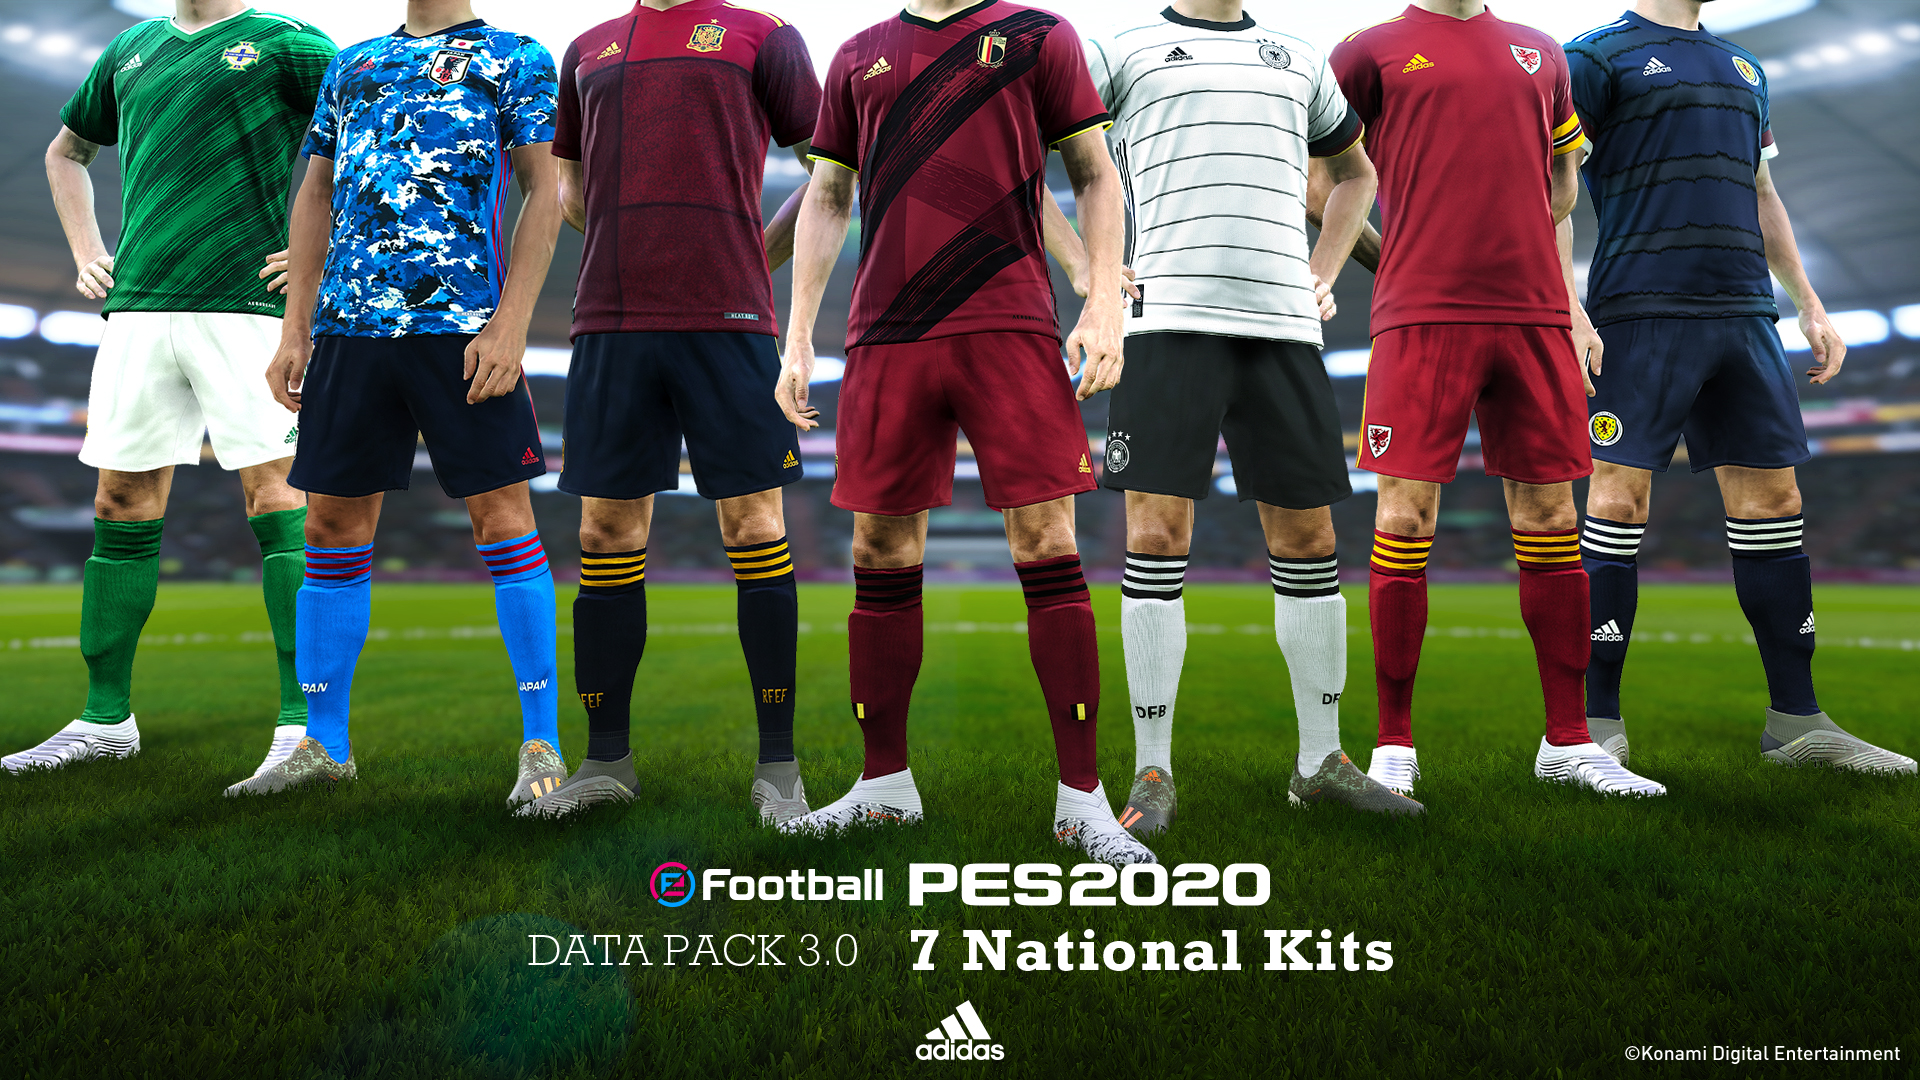 Reclame doneren rit eFootball on Twitter: "@ManUtd @juventusfc PLUS 7 new national kits have  been updated with #DP3 too! 😍 Download Data Pack 3.0 now on PS4, Xbox One  and Steam! #eFootballPES2020 https://t.co/zqgqQrI33c" / Twitter